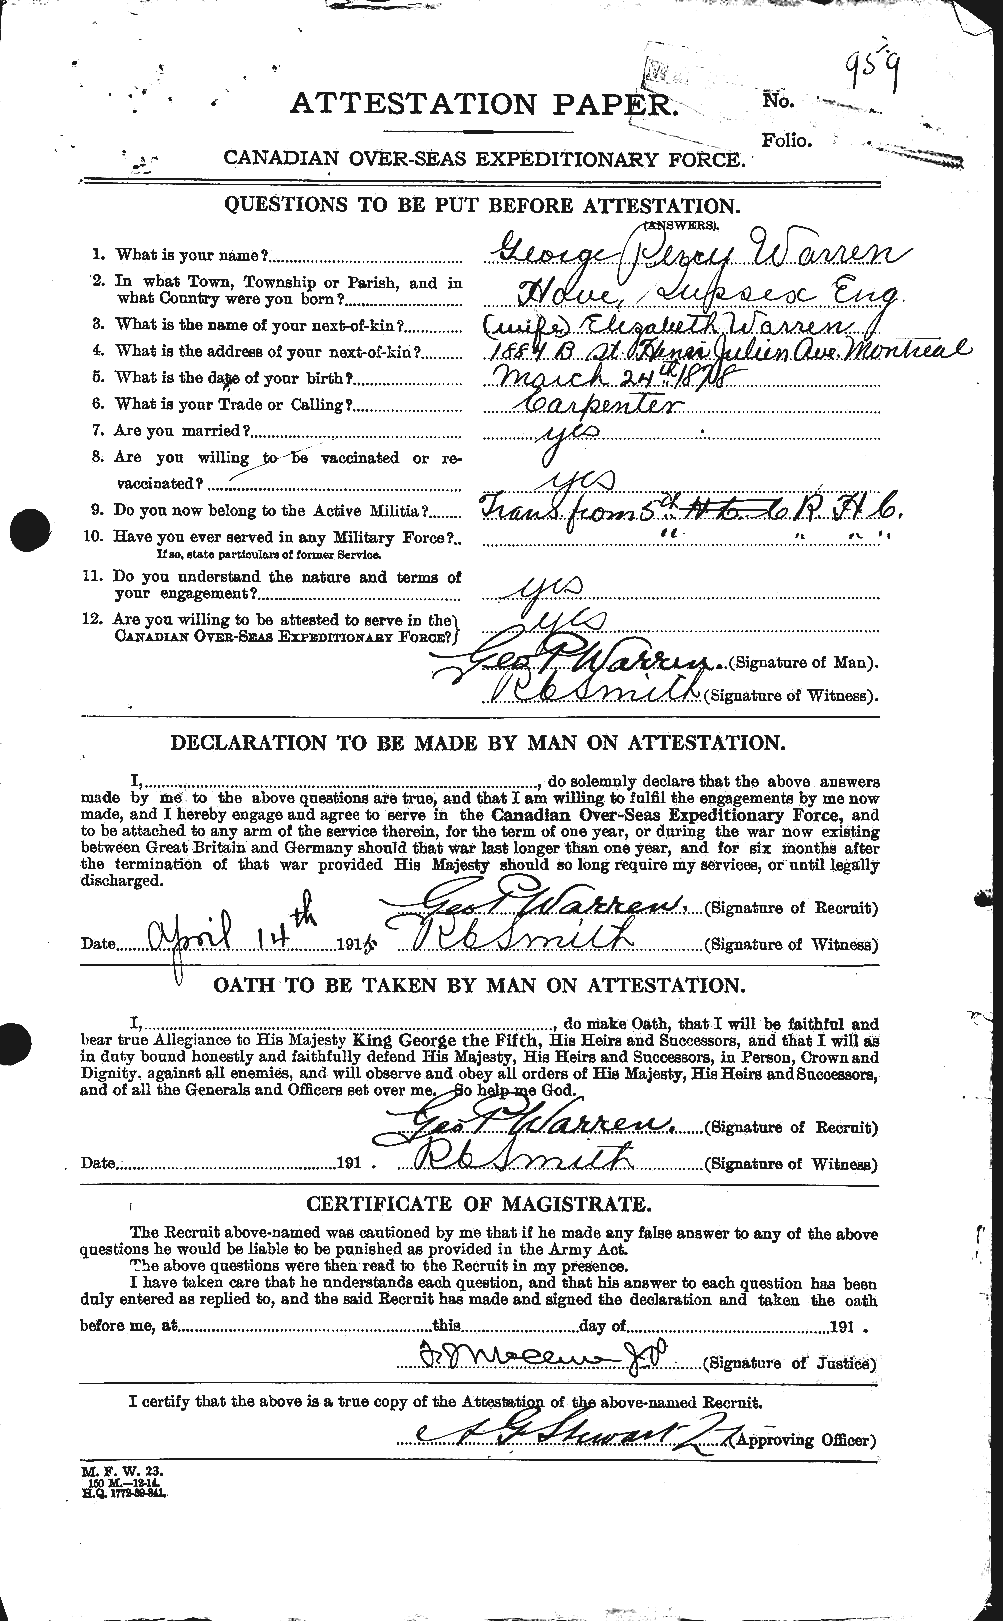 Personnel Records of the First World War - CEF 658471a